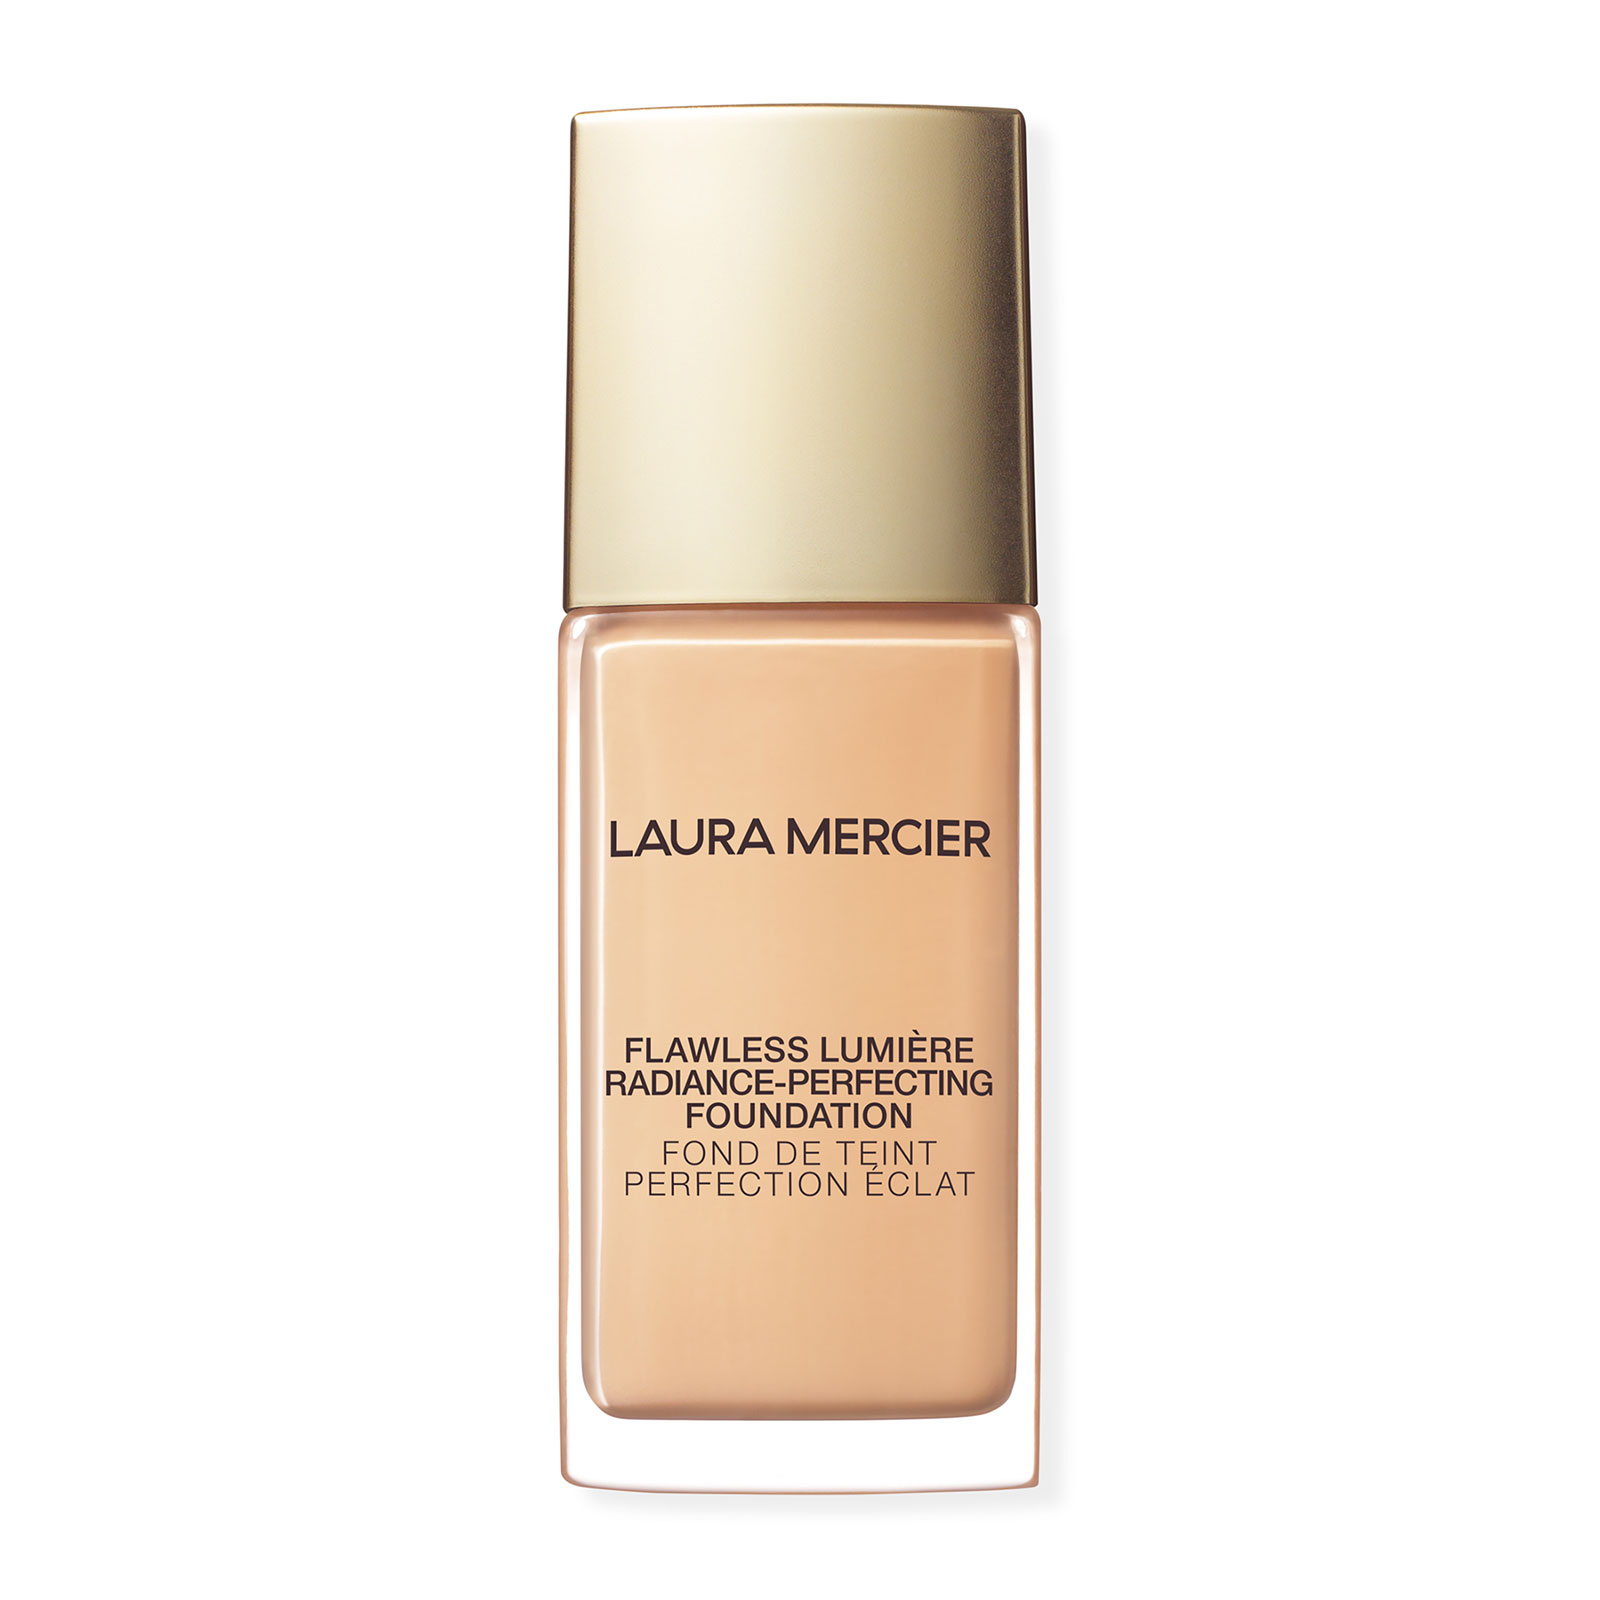 Laura Mercier Flawless Lumiere Radiance-Perfecting Foundation 30Ml 1C0 Cameo